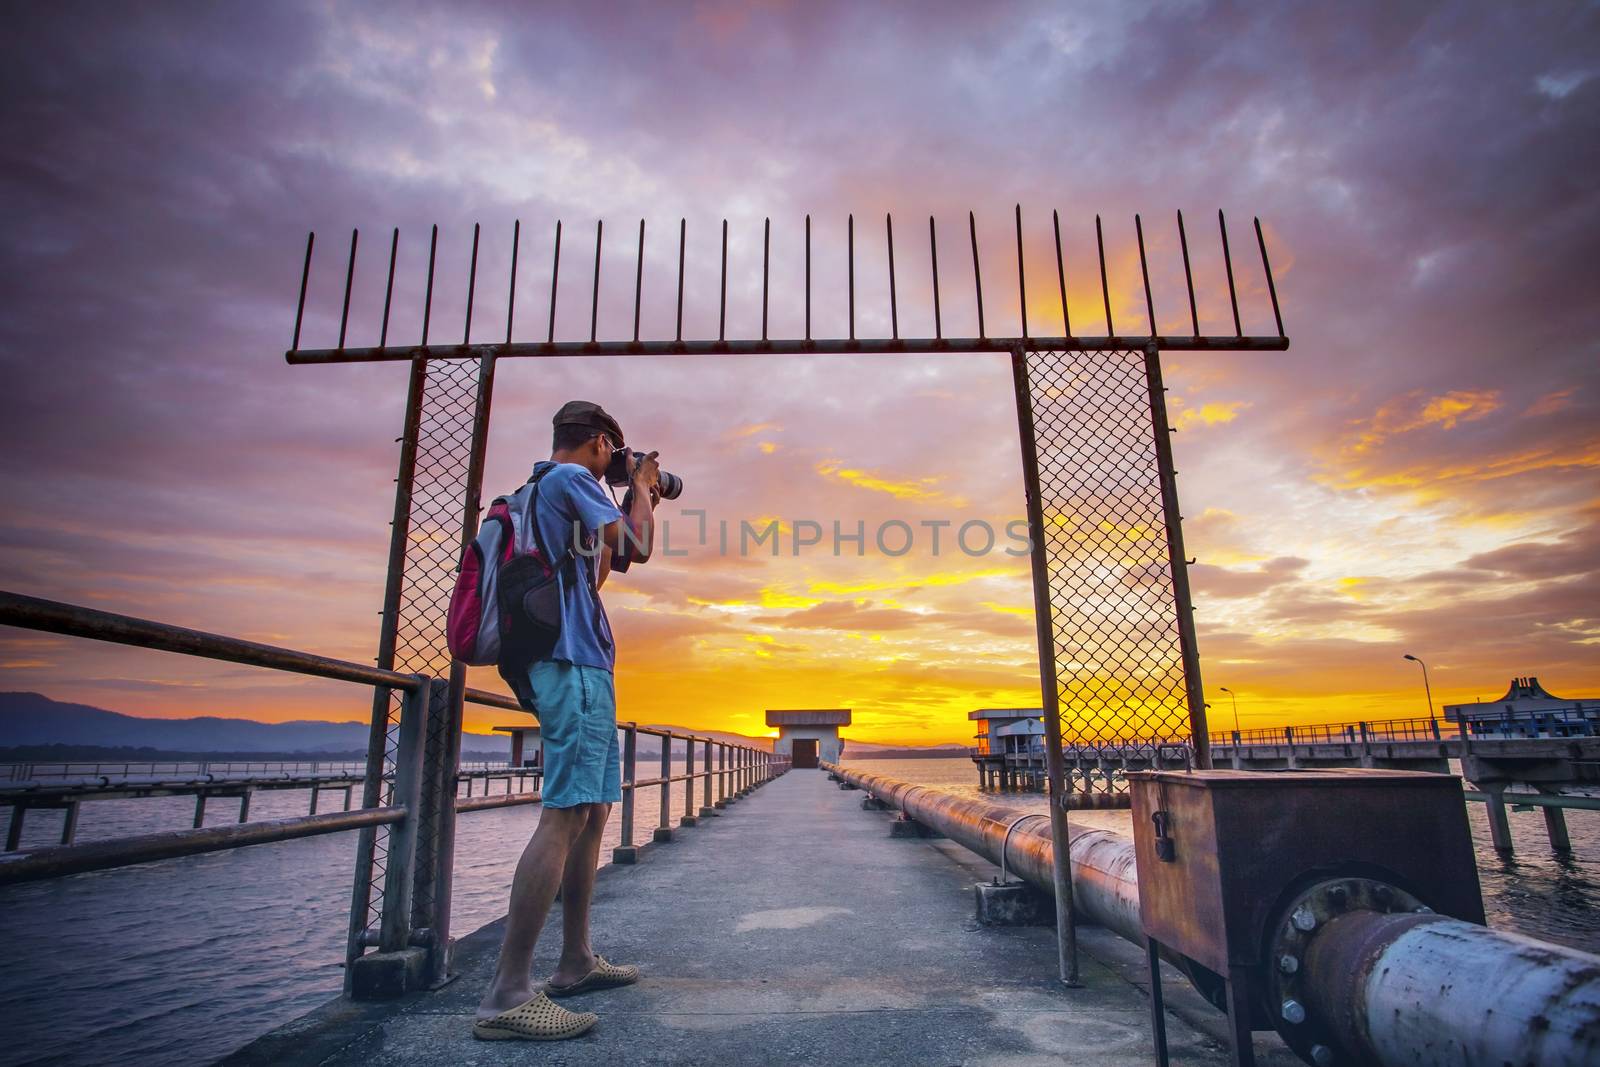 photographer taking a photograph  at water work station  and sun by khunaspix